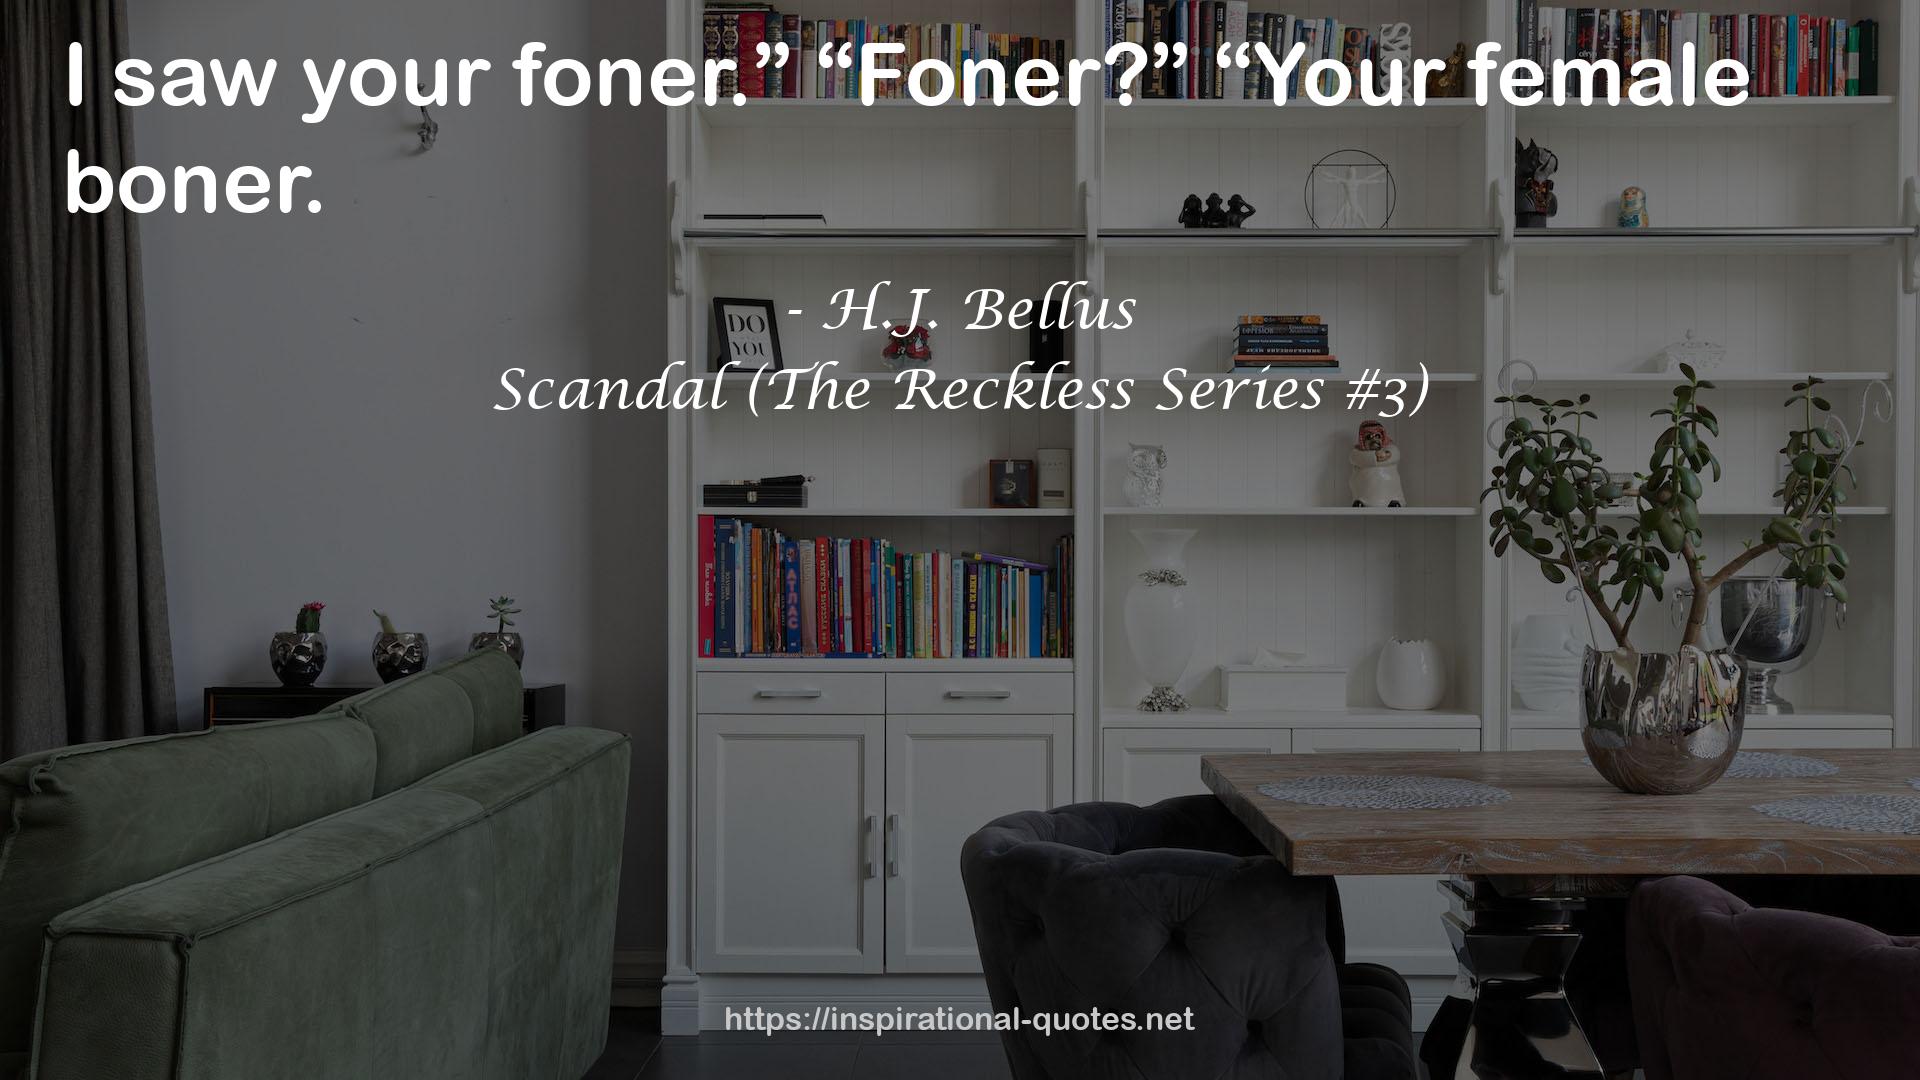 Scandal (The Reckless Series #3) QUOTES